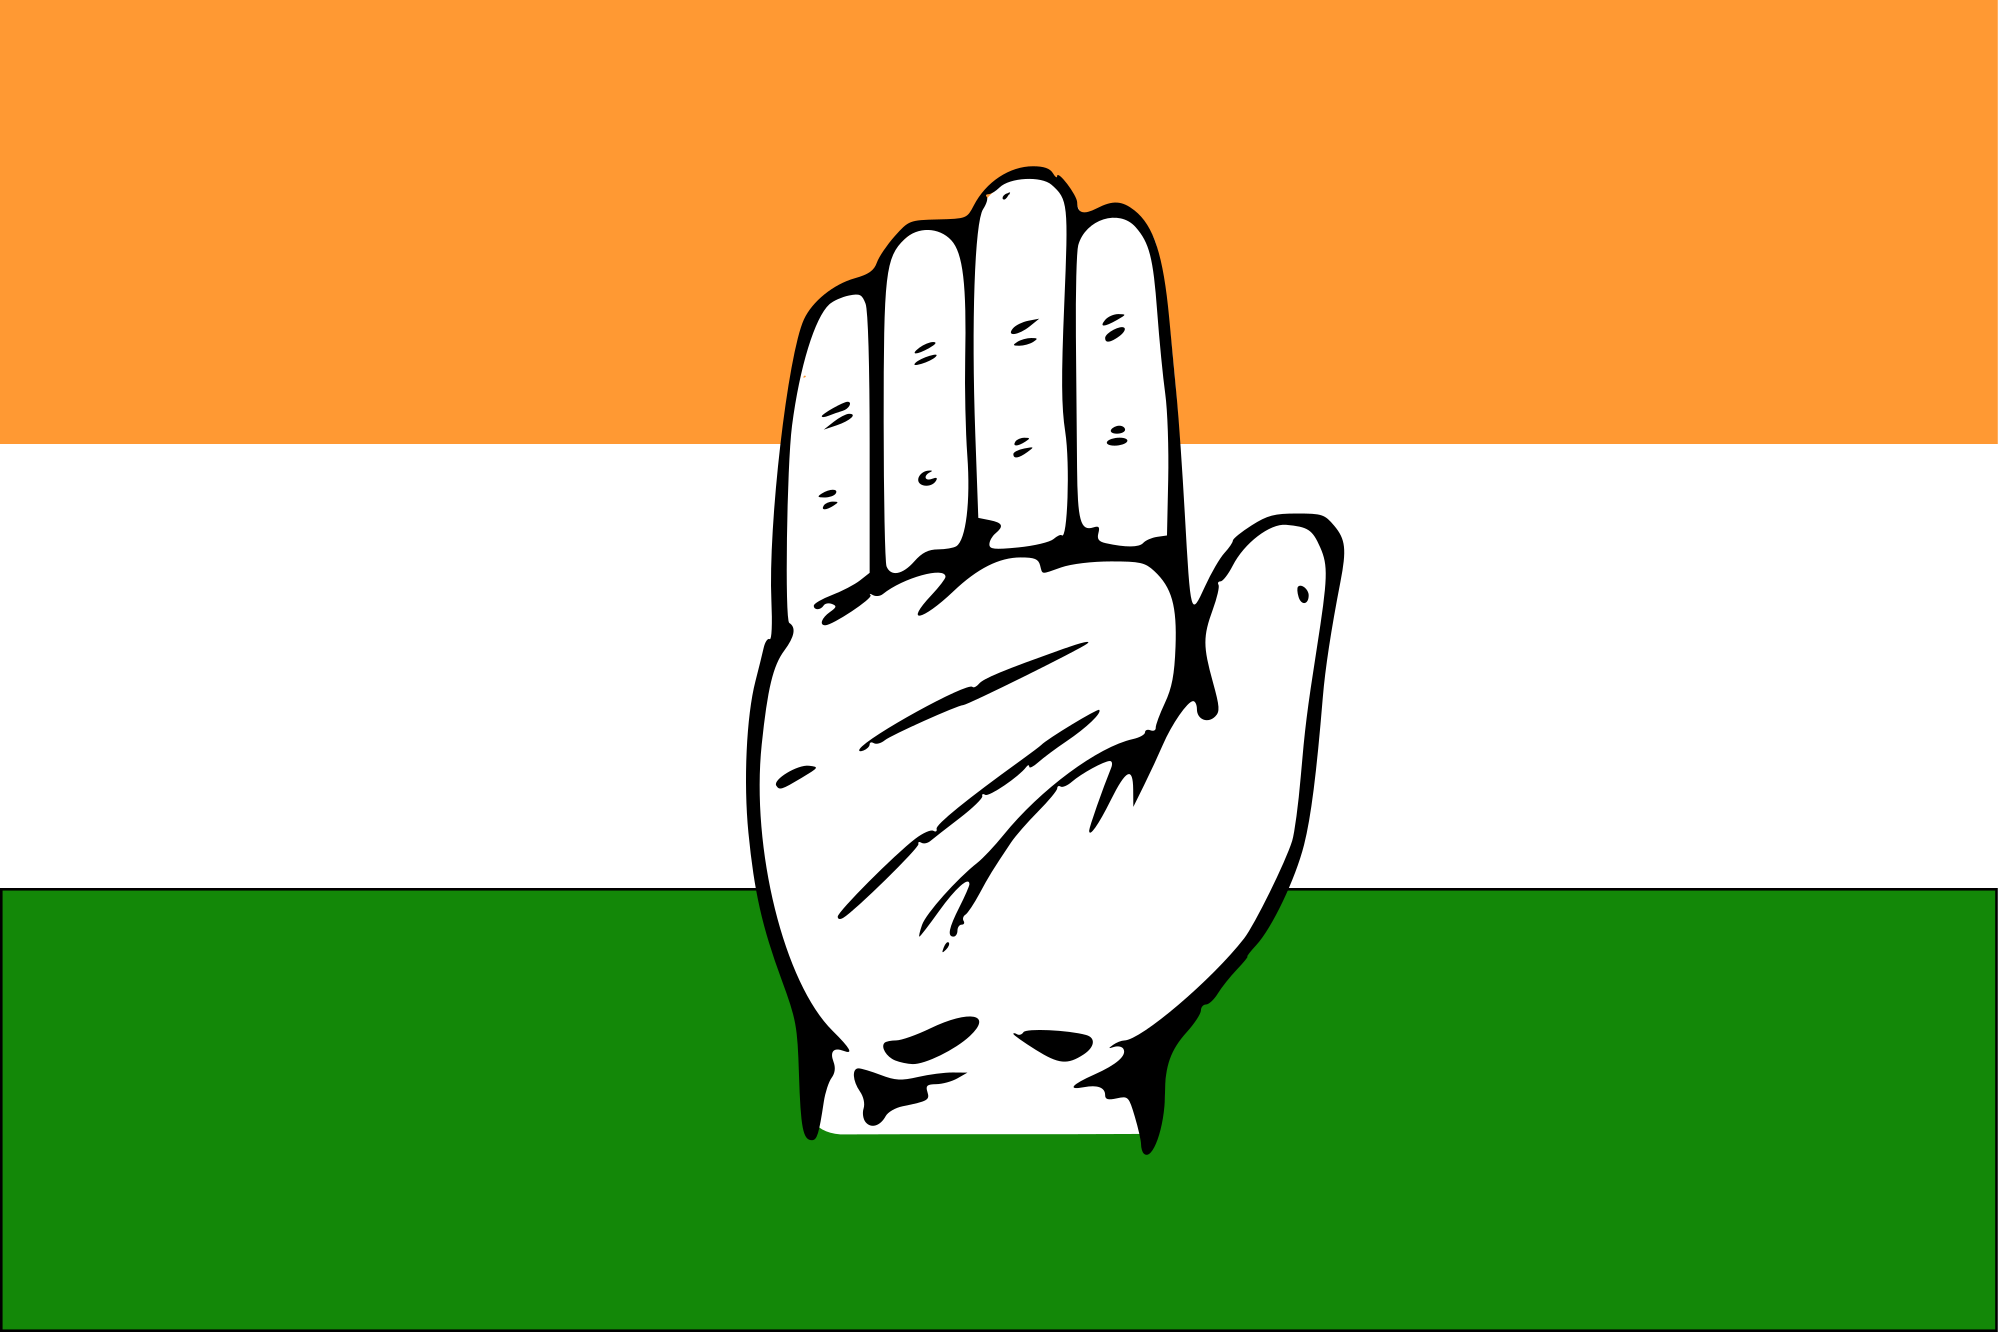 Congress undergoes major reshuffle in UP after 'failed' alliance attempt